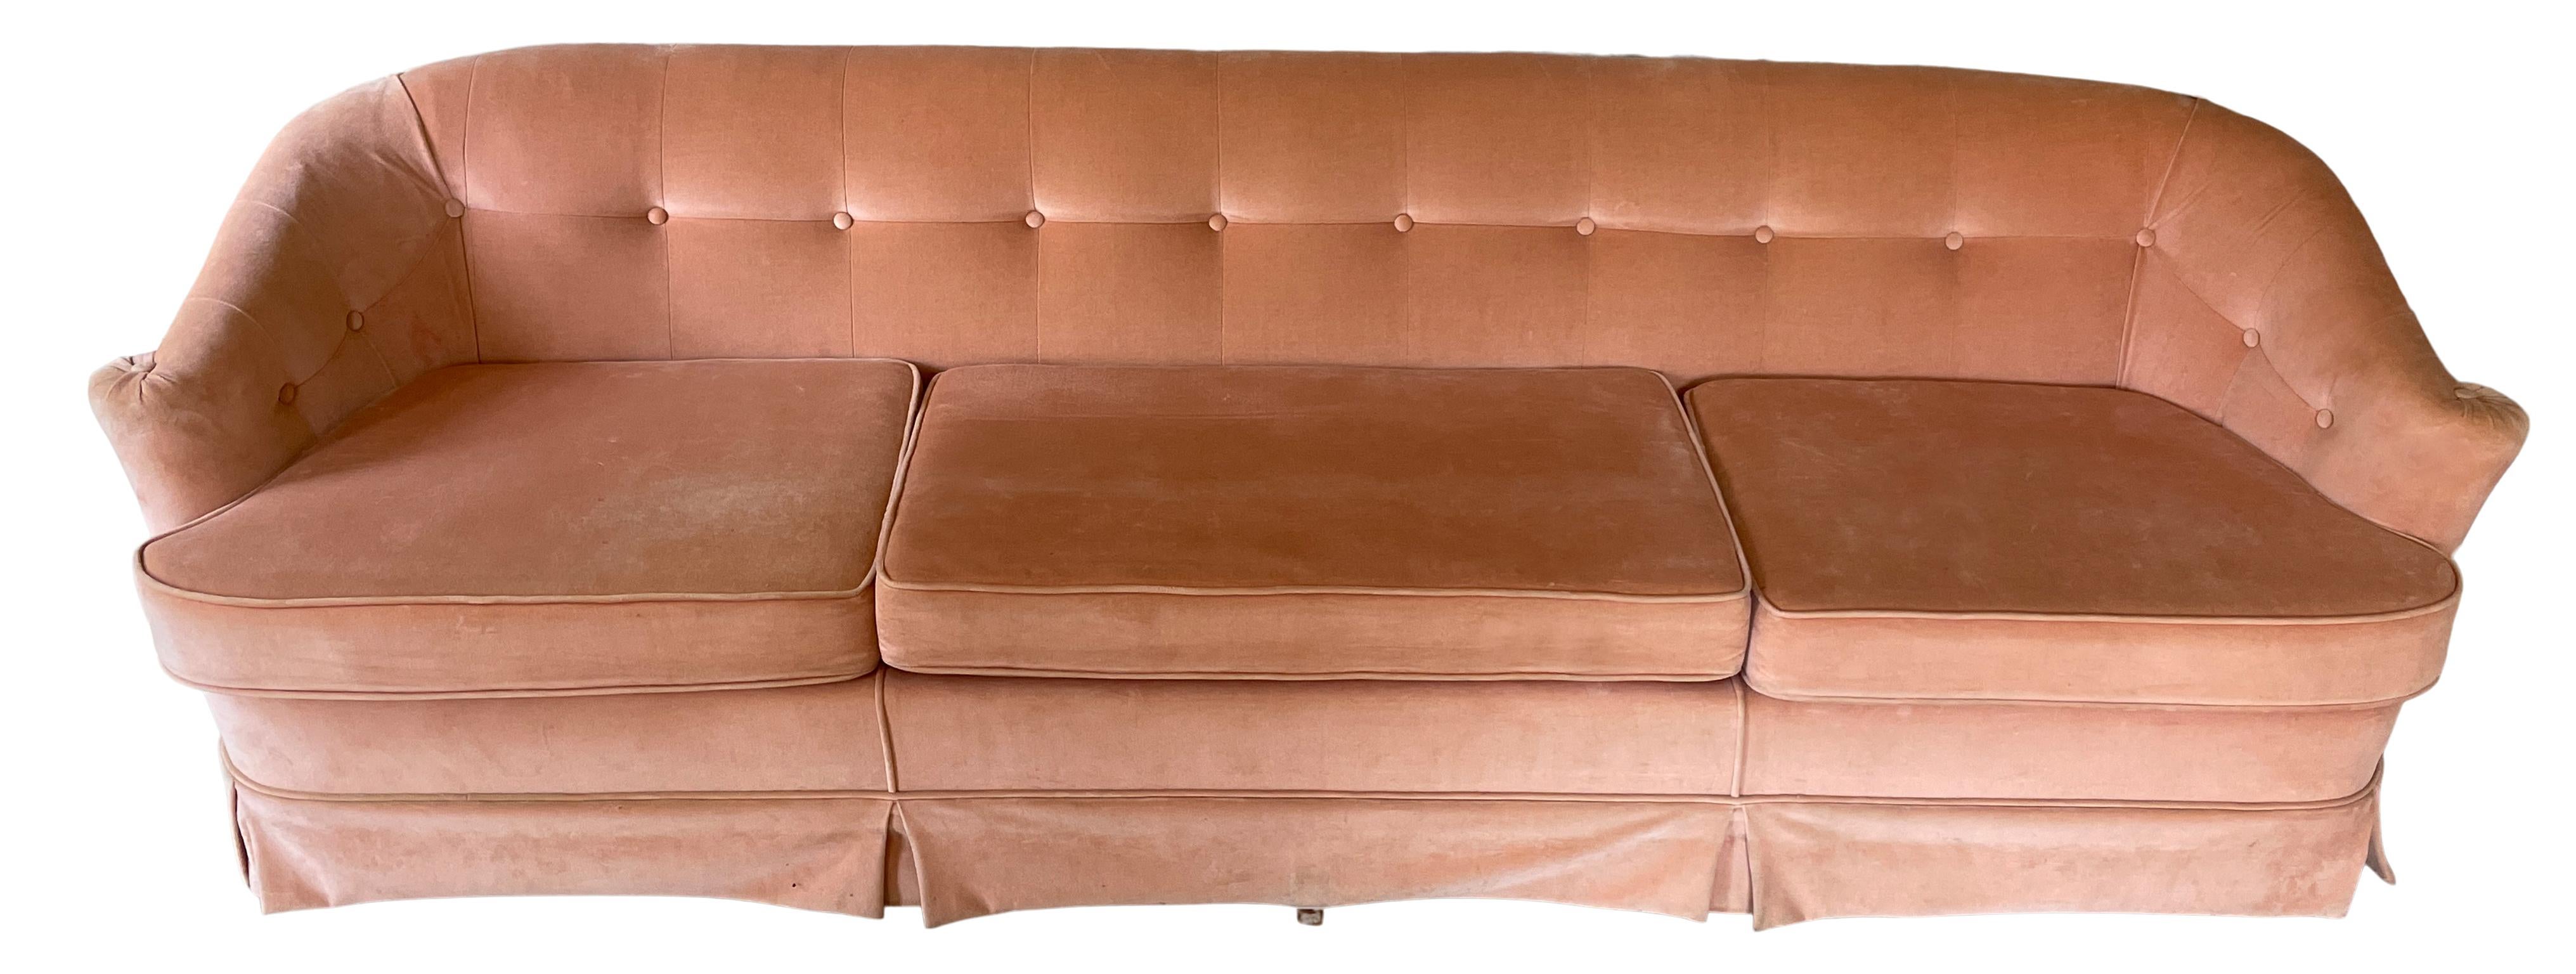 Beautiful mid century Pink tufted Velvet 8' long sofa couch daybed. Amazing curved back with 3 Cushions. The sofa was covered in Plastic when purchased so the pastel pink velvet is in amazing condition. Great Design and Color. Sofa is in amazing